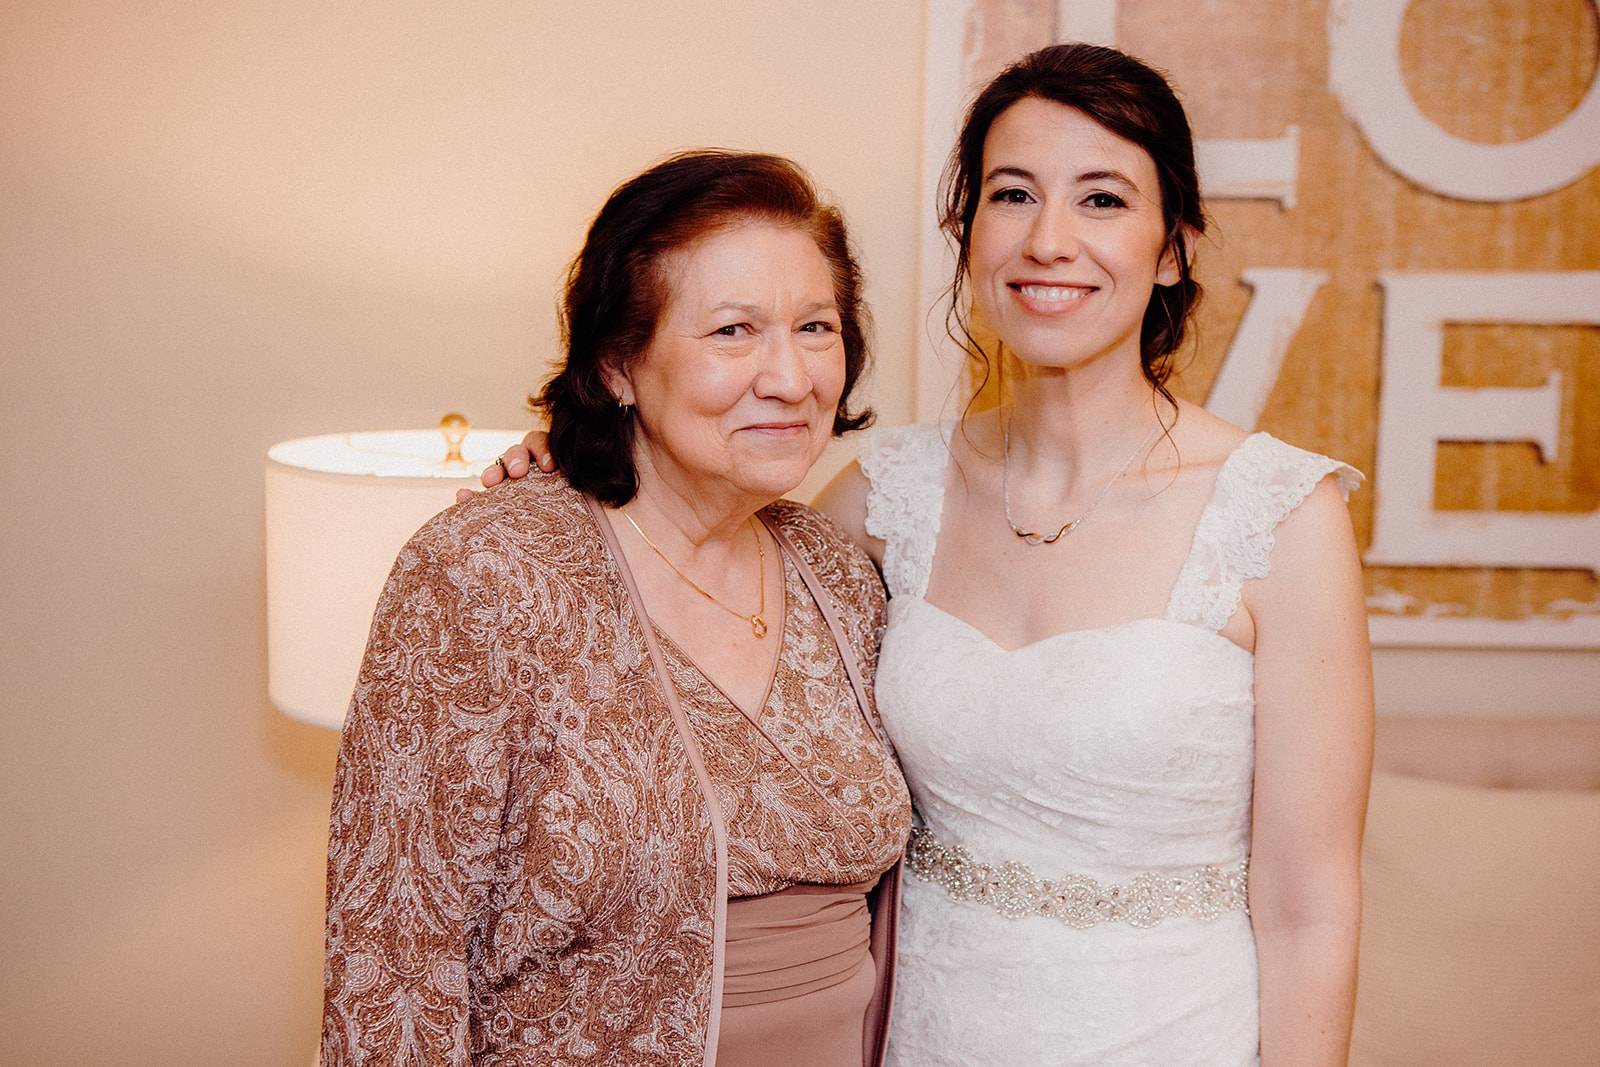 Bride with her mom in the woodwinds-
new haven wedding photographer